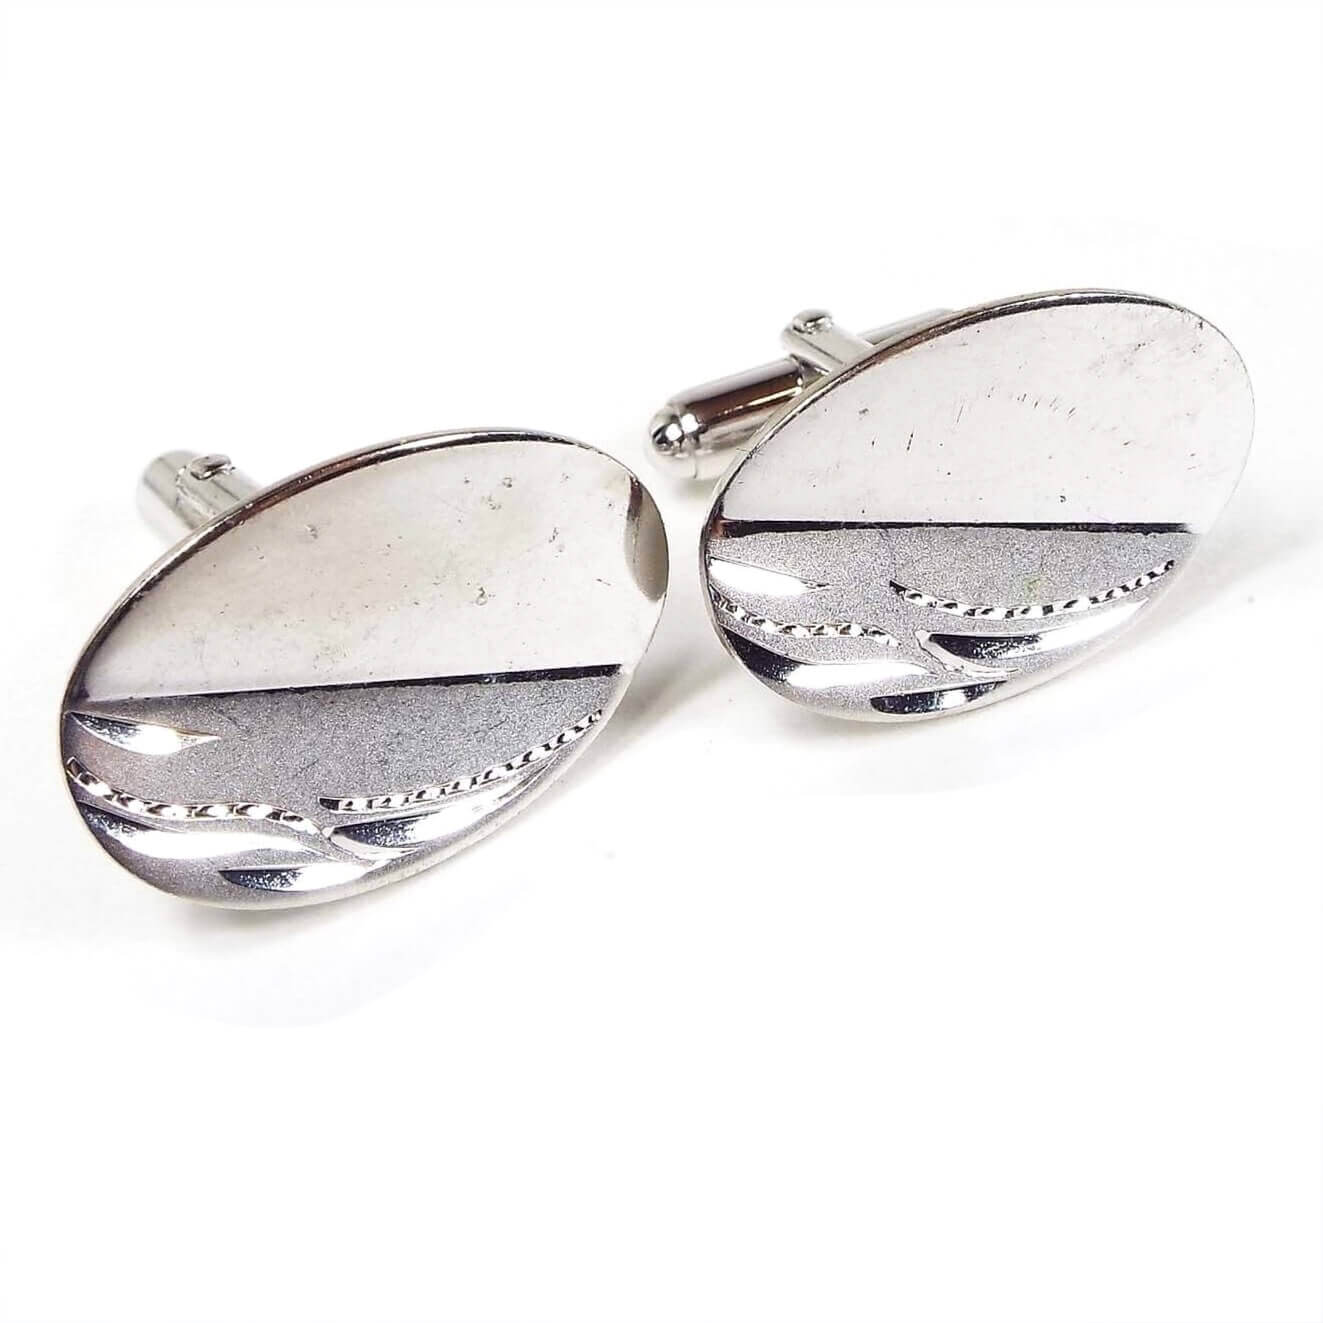 Angled front view of the Mid Century vintage Anson sterling silver cufflinks. They are brighter silver in color and oval in shape. There have two diagonal sections on the oval with one being plain shiny silver and the other being matte silver with a shiny e